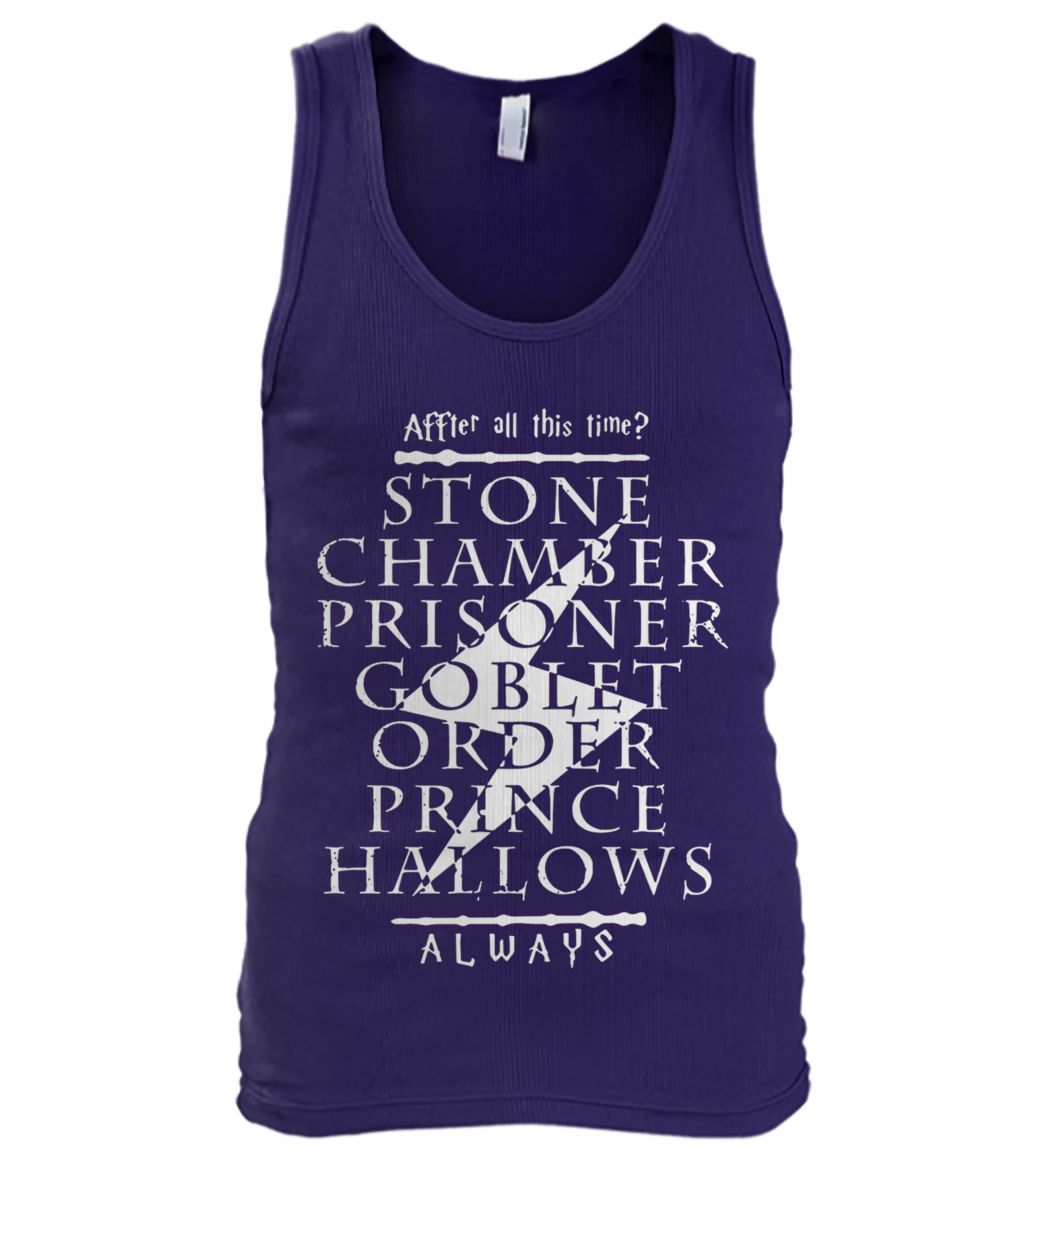 After all this time stone chamber prince halloween always harry potter men's tank top